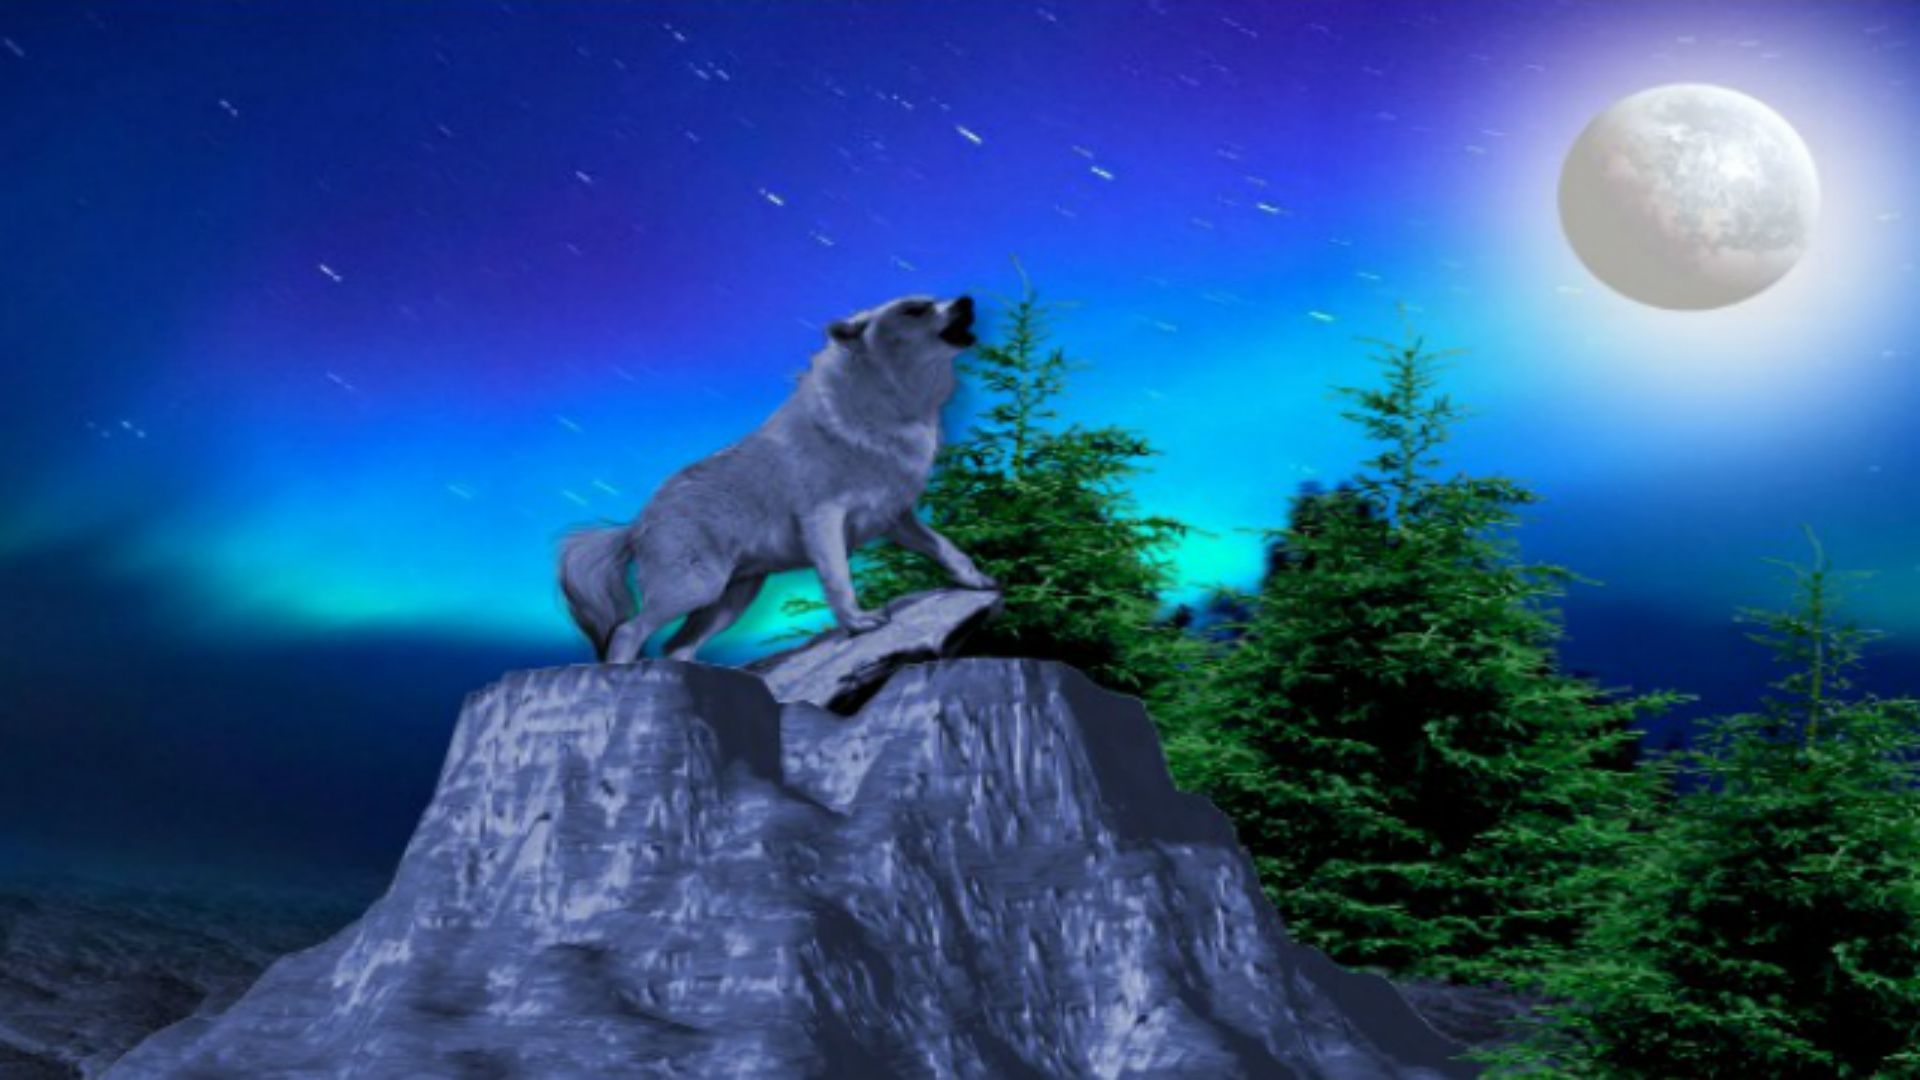 Download Wolf Howling At The Moon Desktop Backgrounds #oyy91 Free